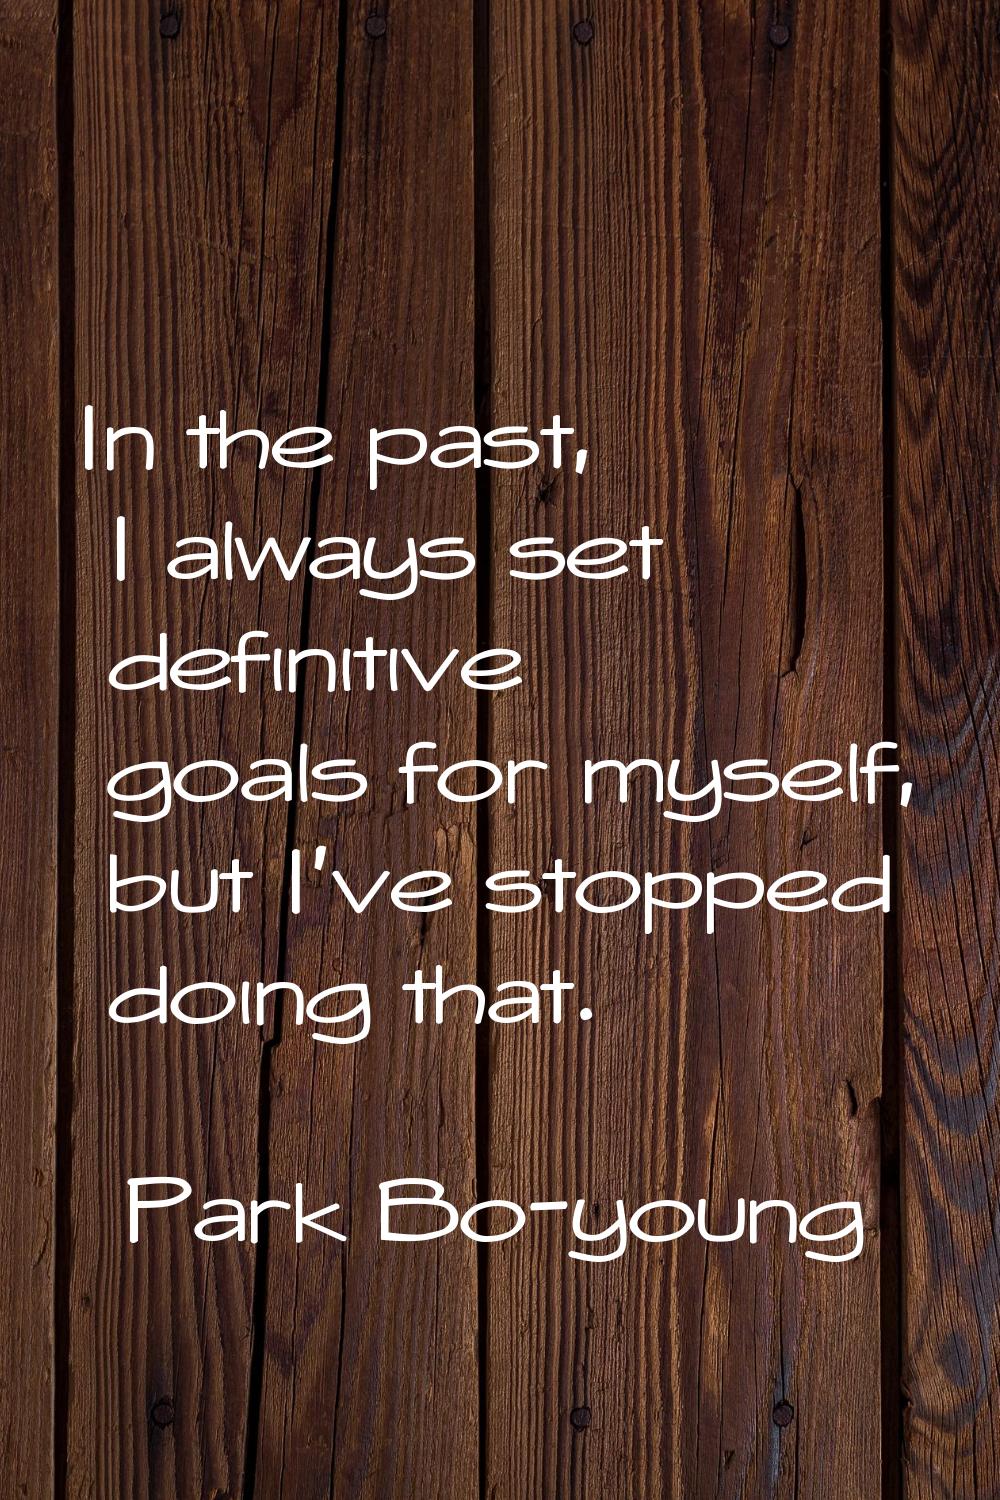 In the past, I always set definitive goals for myself, but I've stopped doing that.